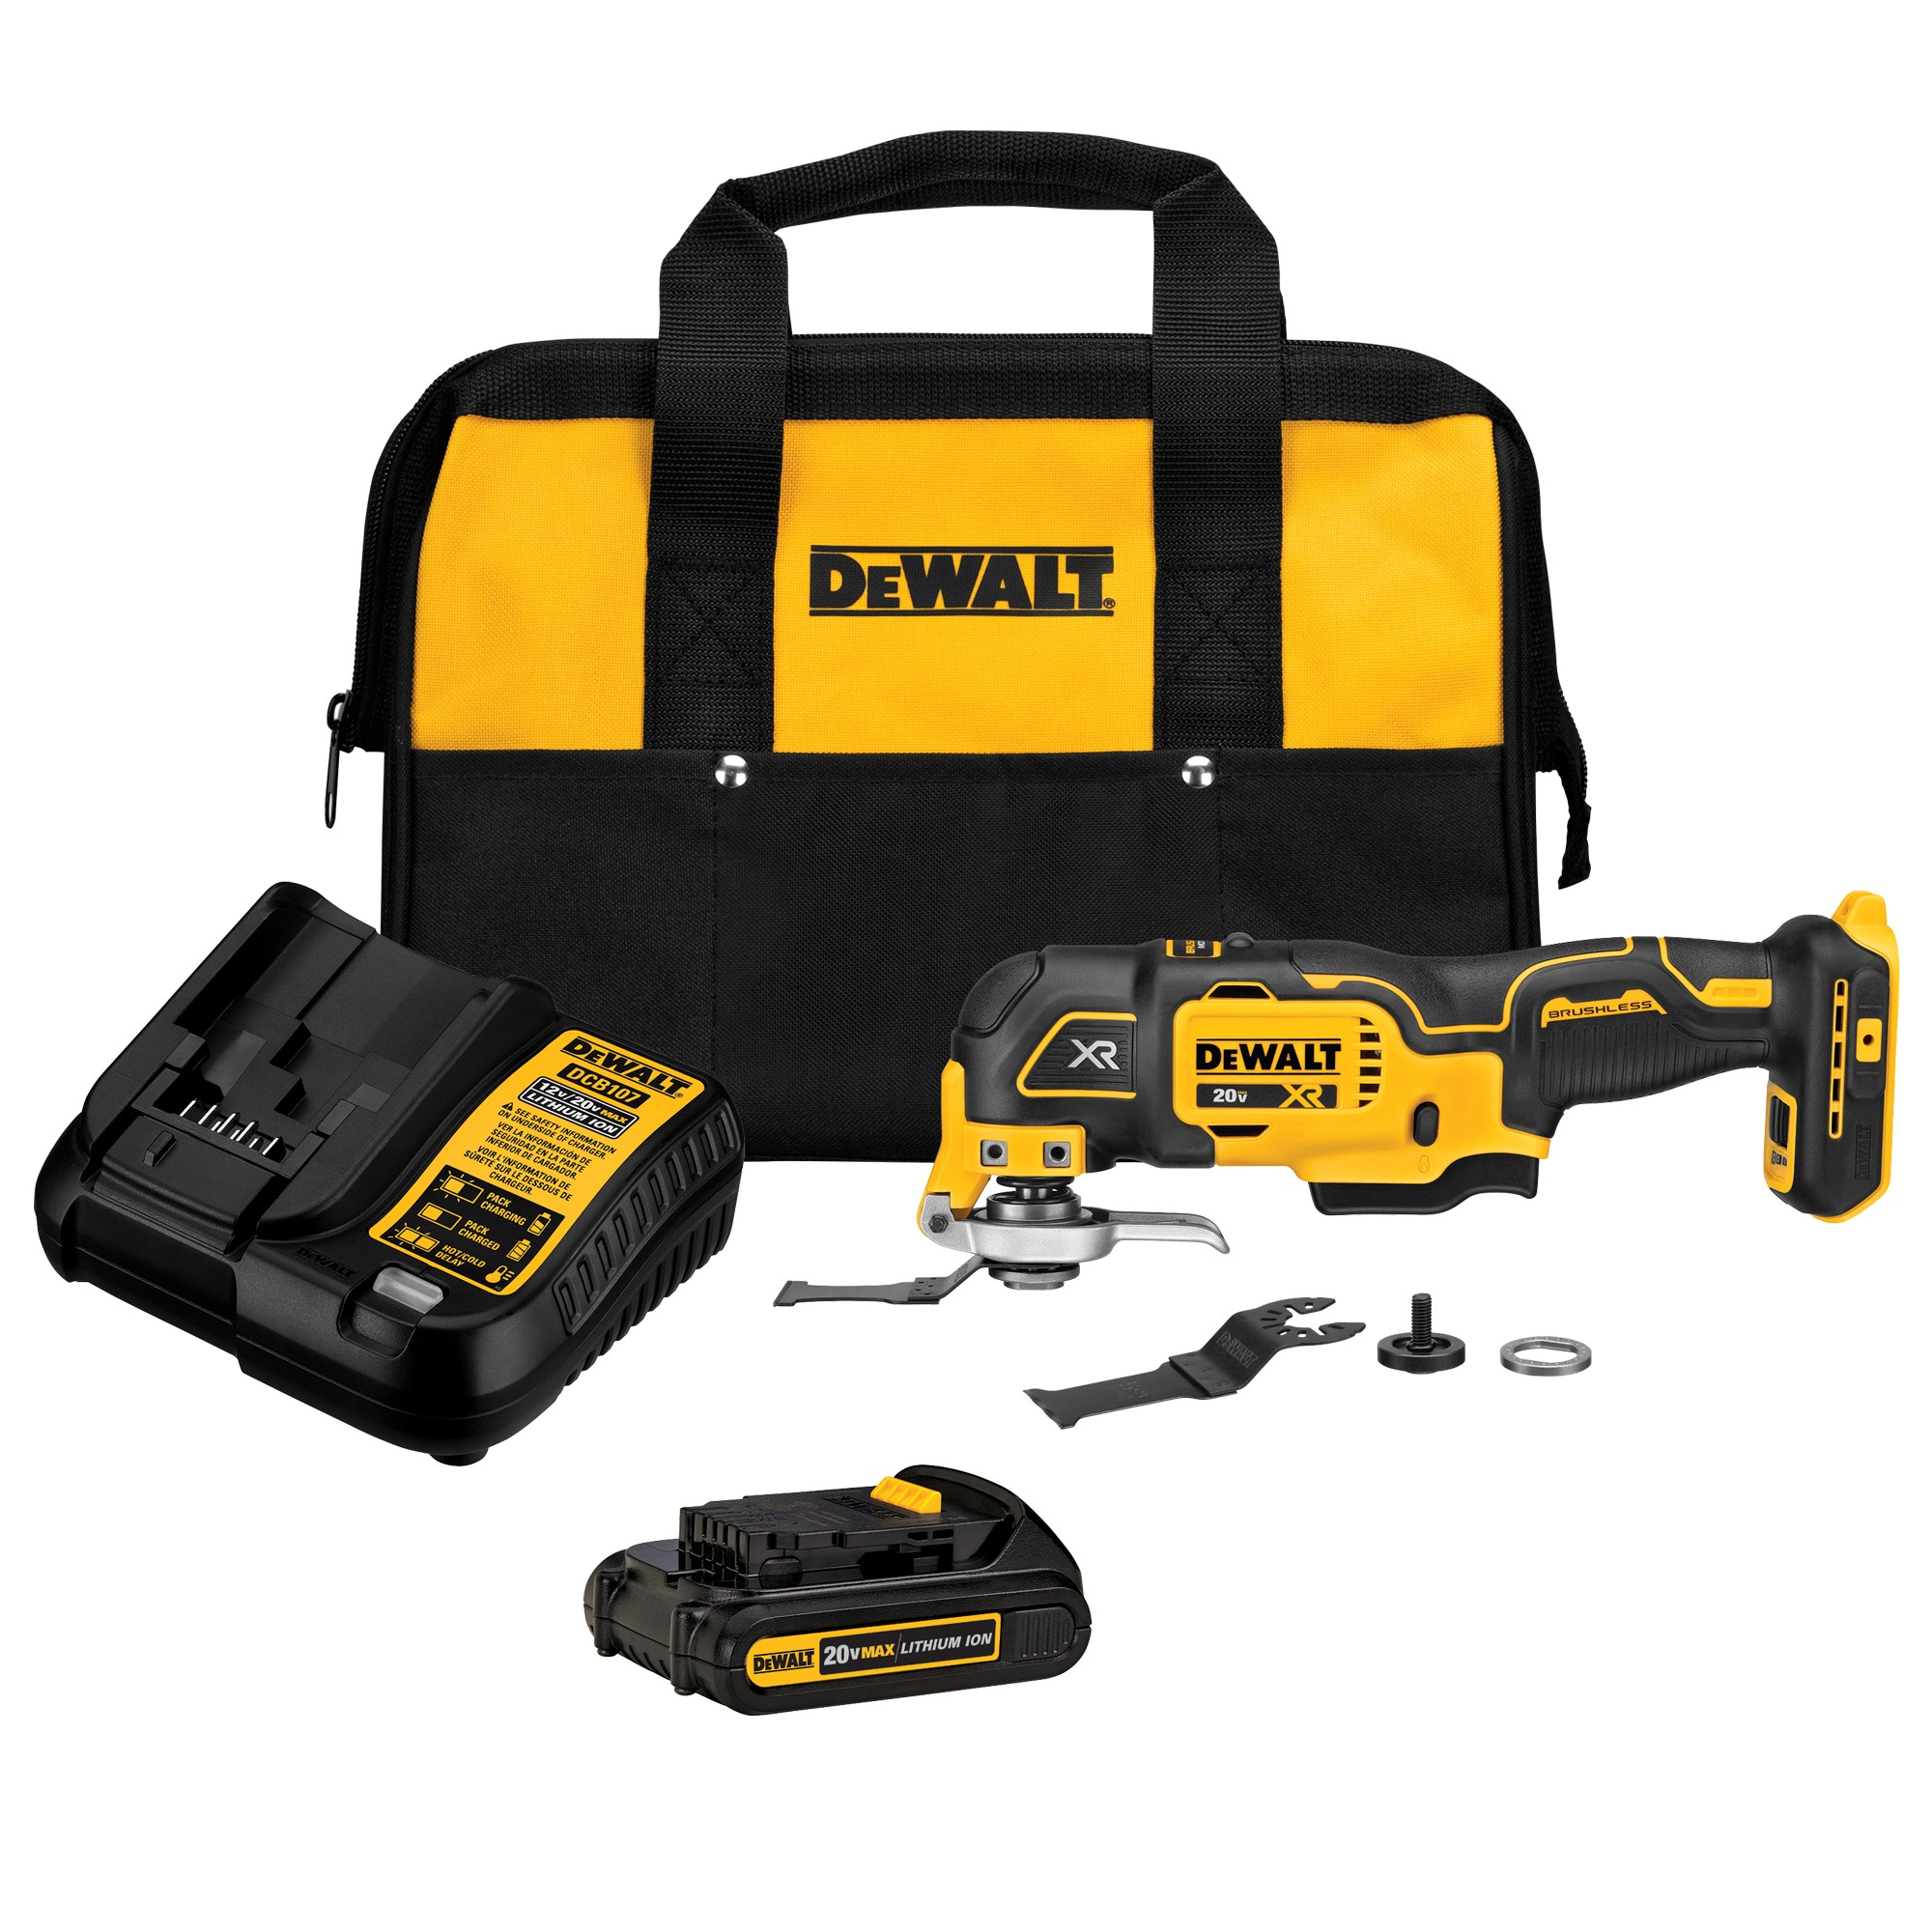 DEWALT Cordless Brushless 20-volt Max 3-speed Oscillating Multi-Tool Kit with Soft Case (1-Battery Included) in the Oscillating Kits department at Lowes.com